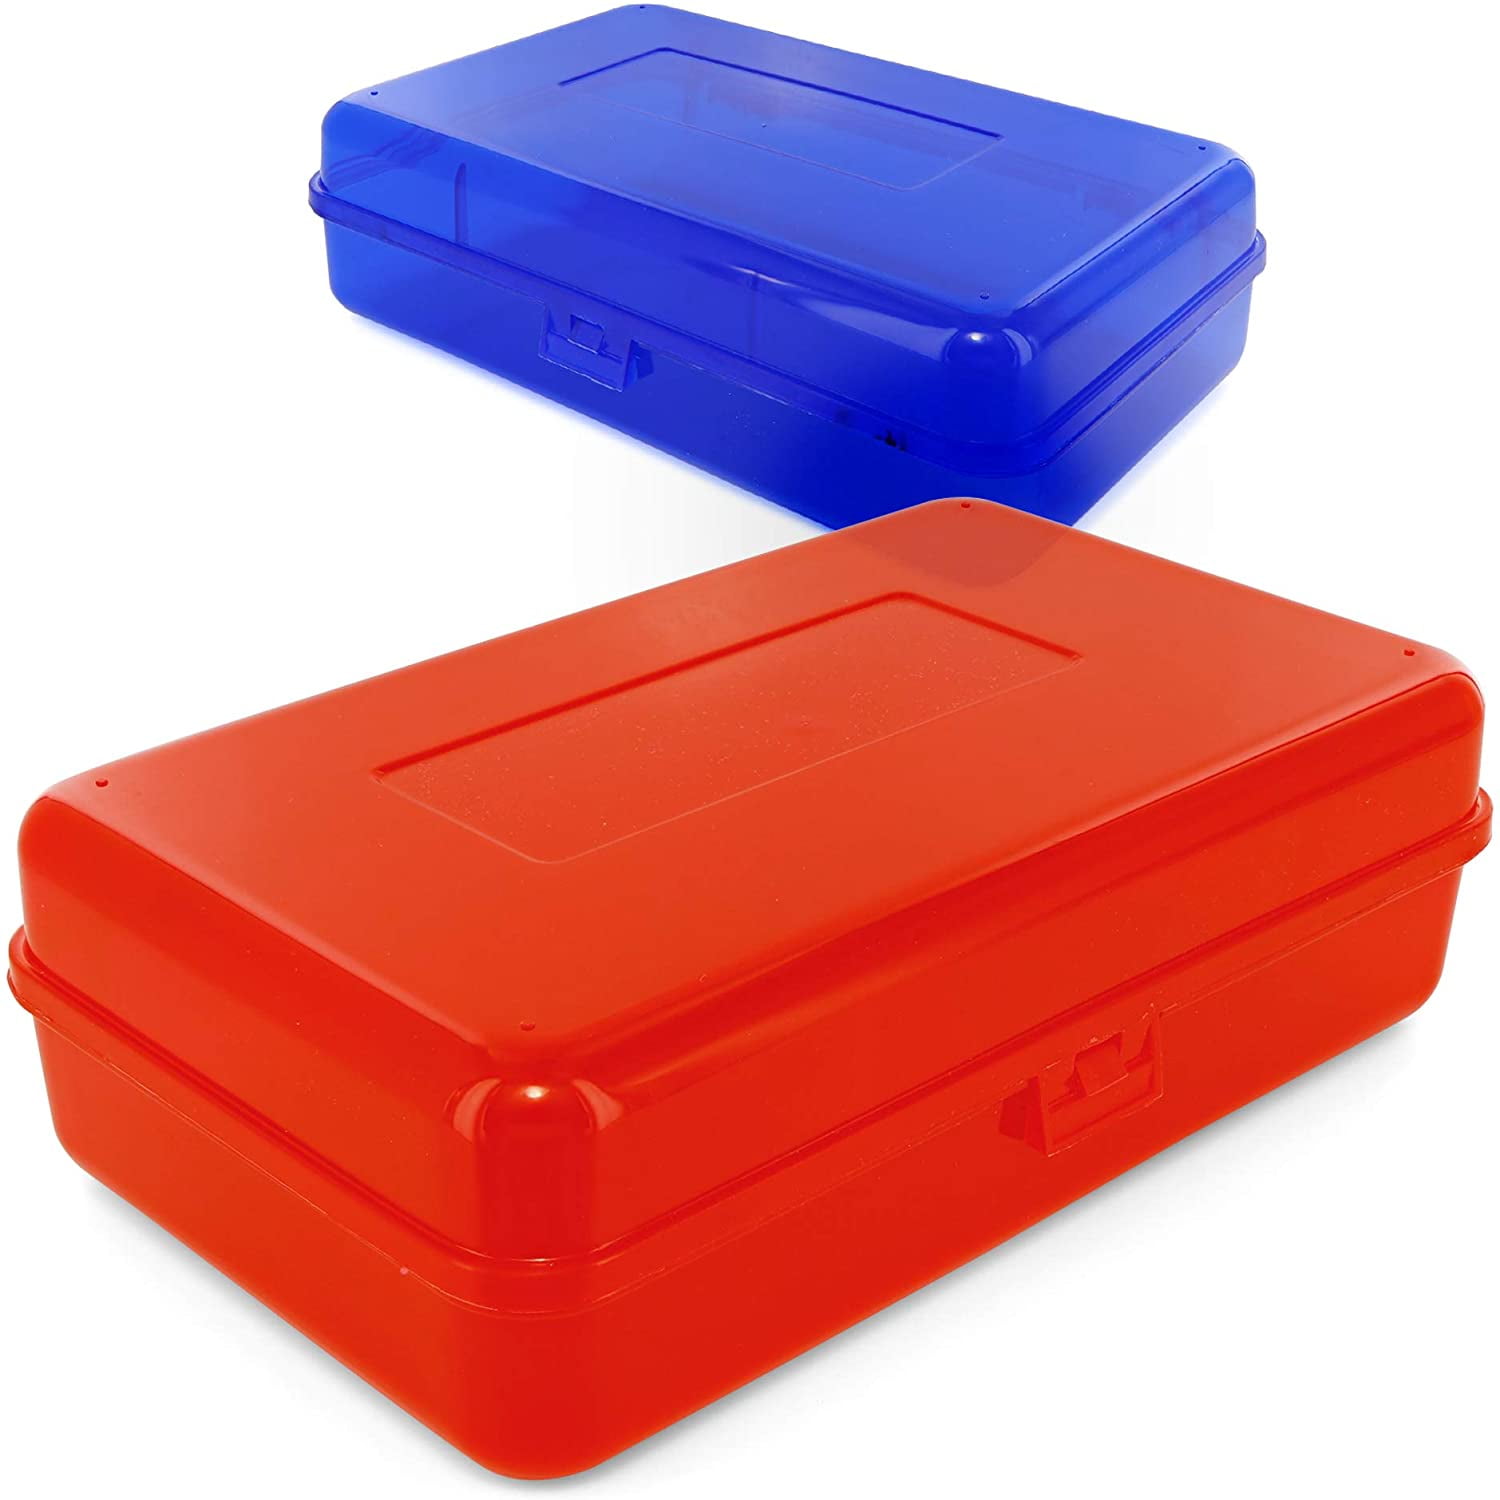 Emraw Multipurpose Utility Box Large Assorted Colors, Pack of 2 (New)